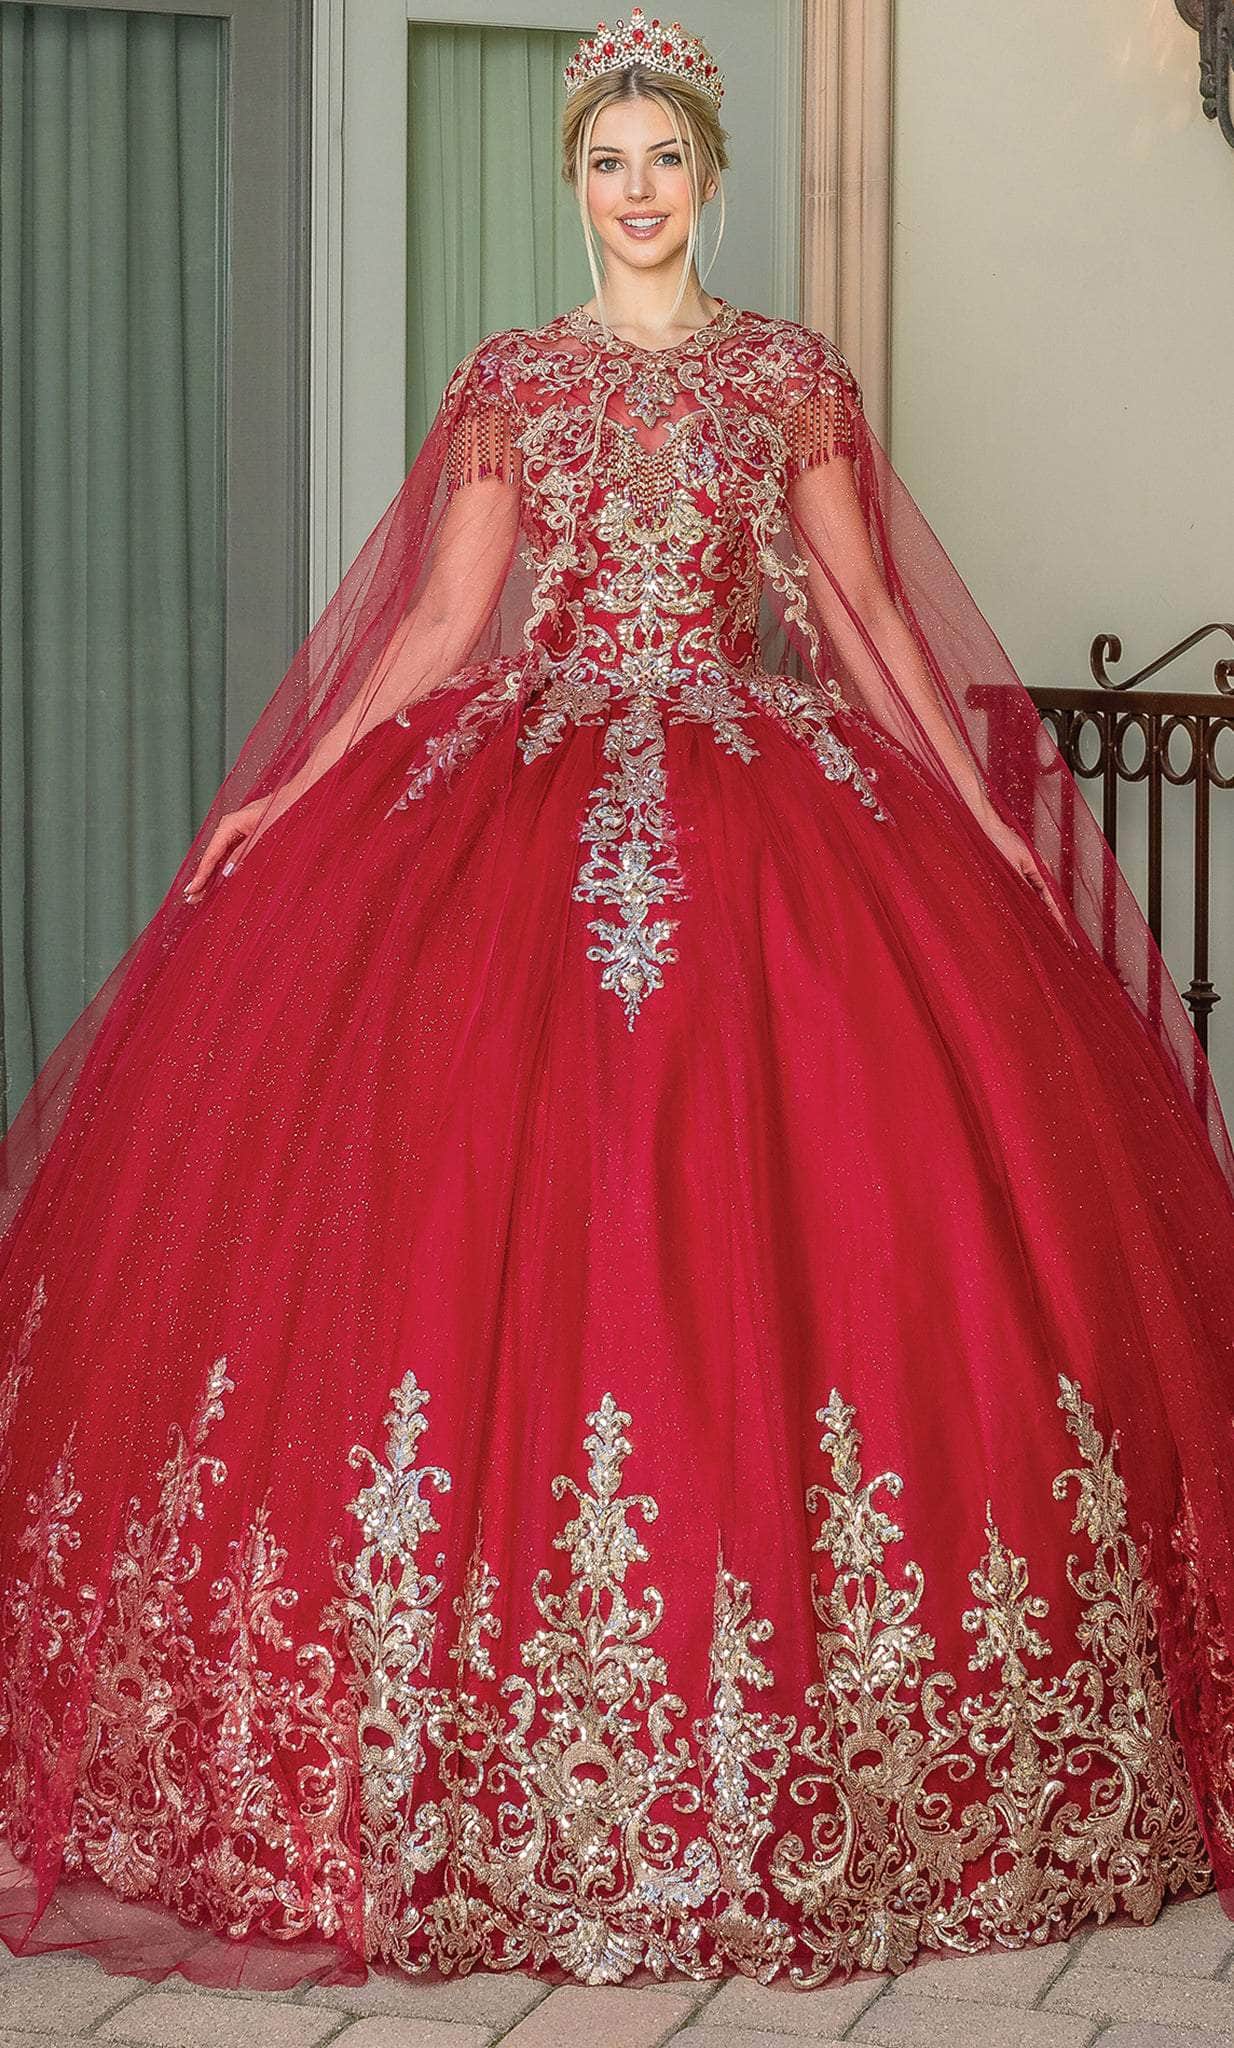 Image of Dancing Queen 1708 - Illusion Bateau Embellished Ballgown